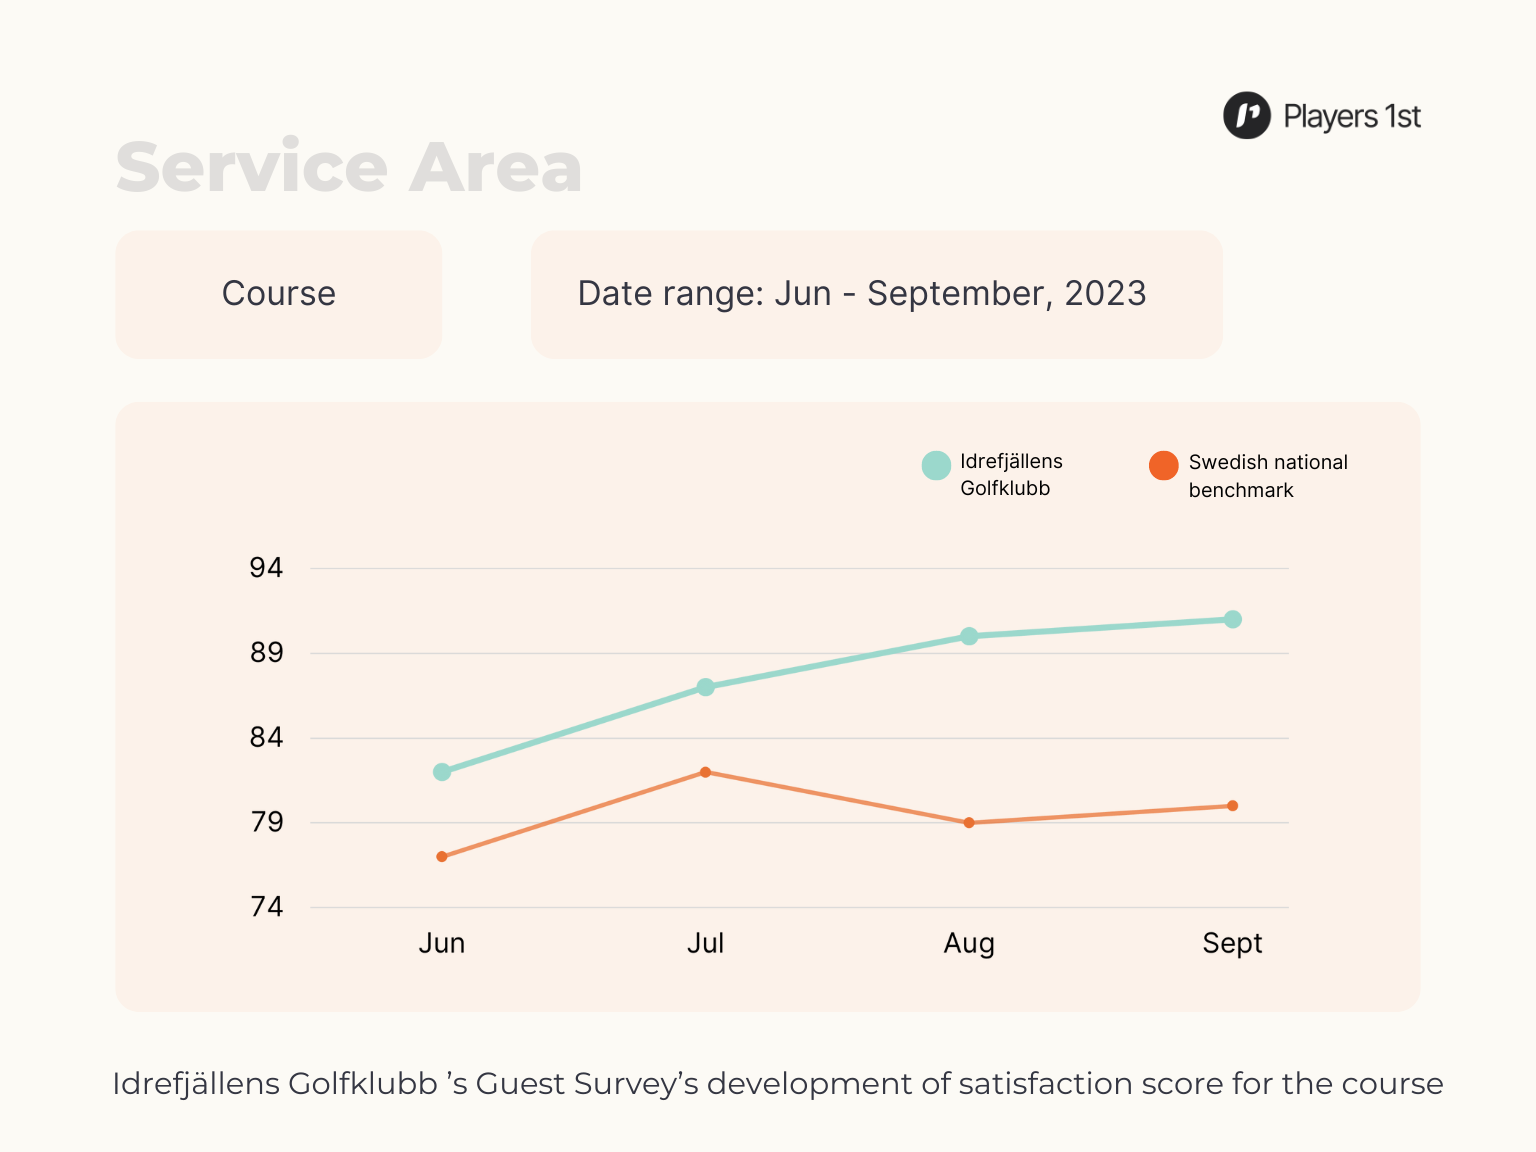 Figure 4: The development of the satisfaction score for the course at Idrefjällens Golfklubb from June to September, 2023. Source: Players 1st